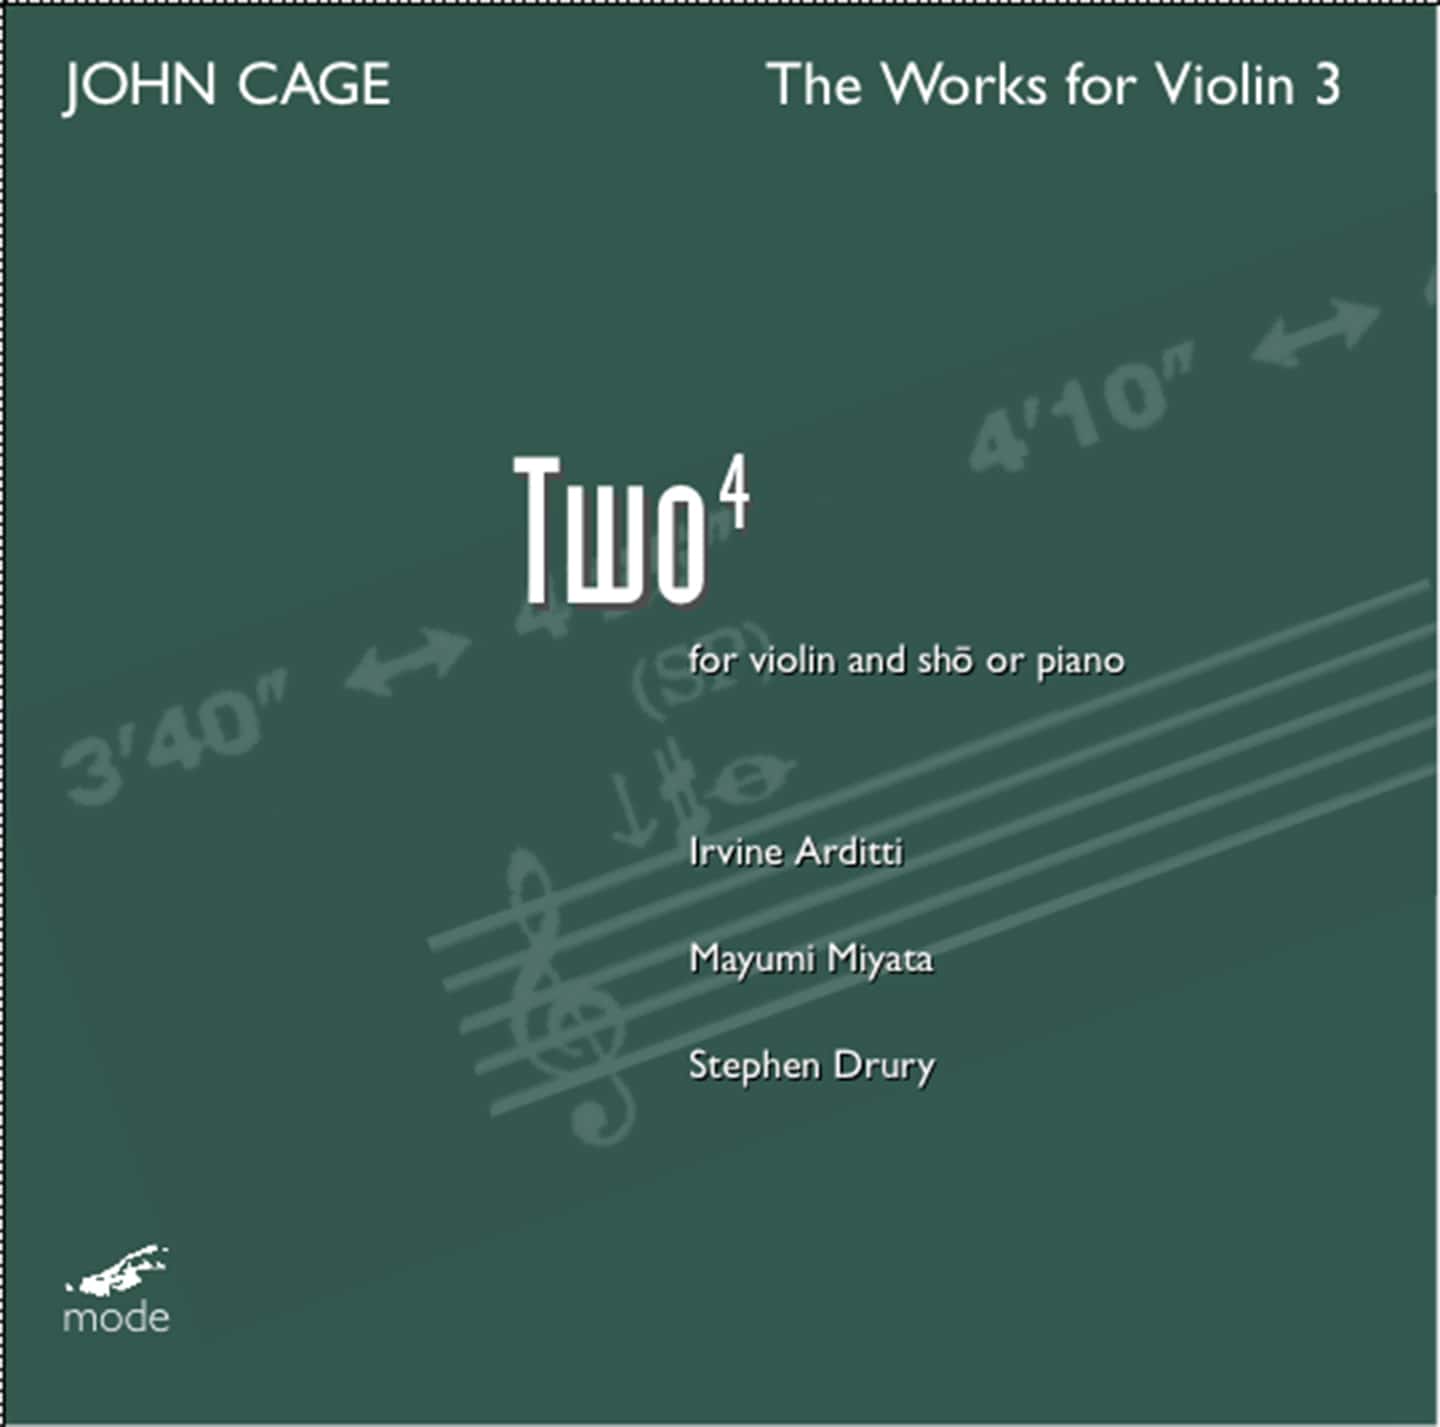 Cage Edition 23- The Works for Violin 3